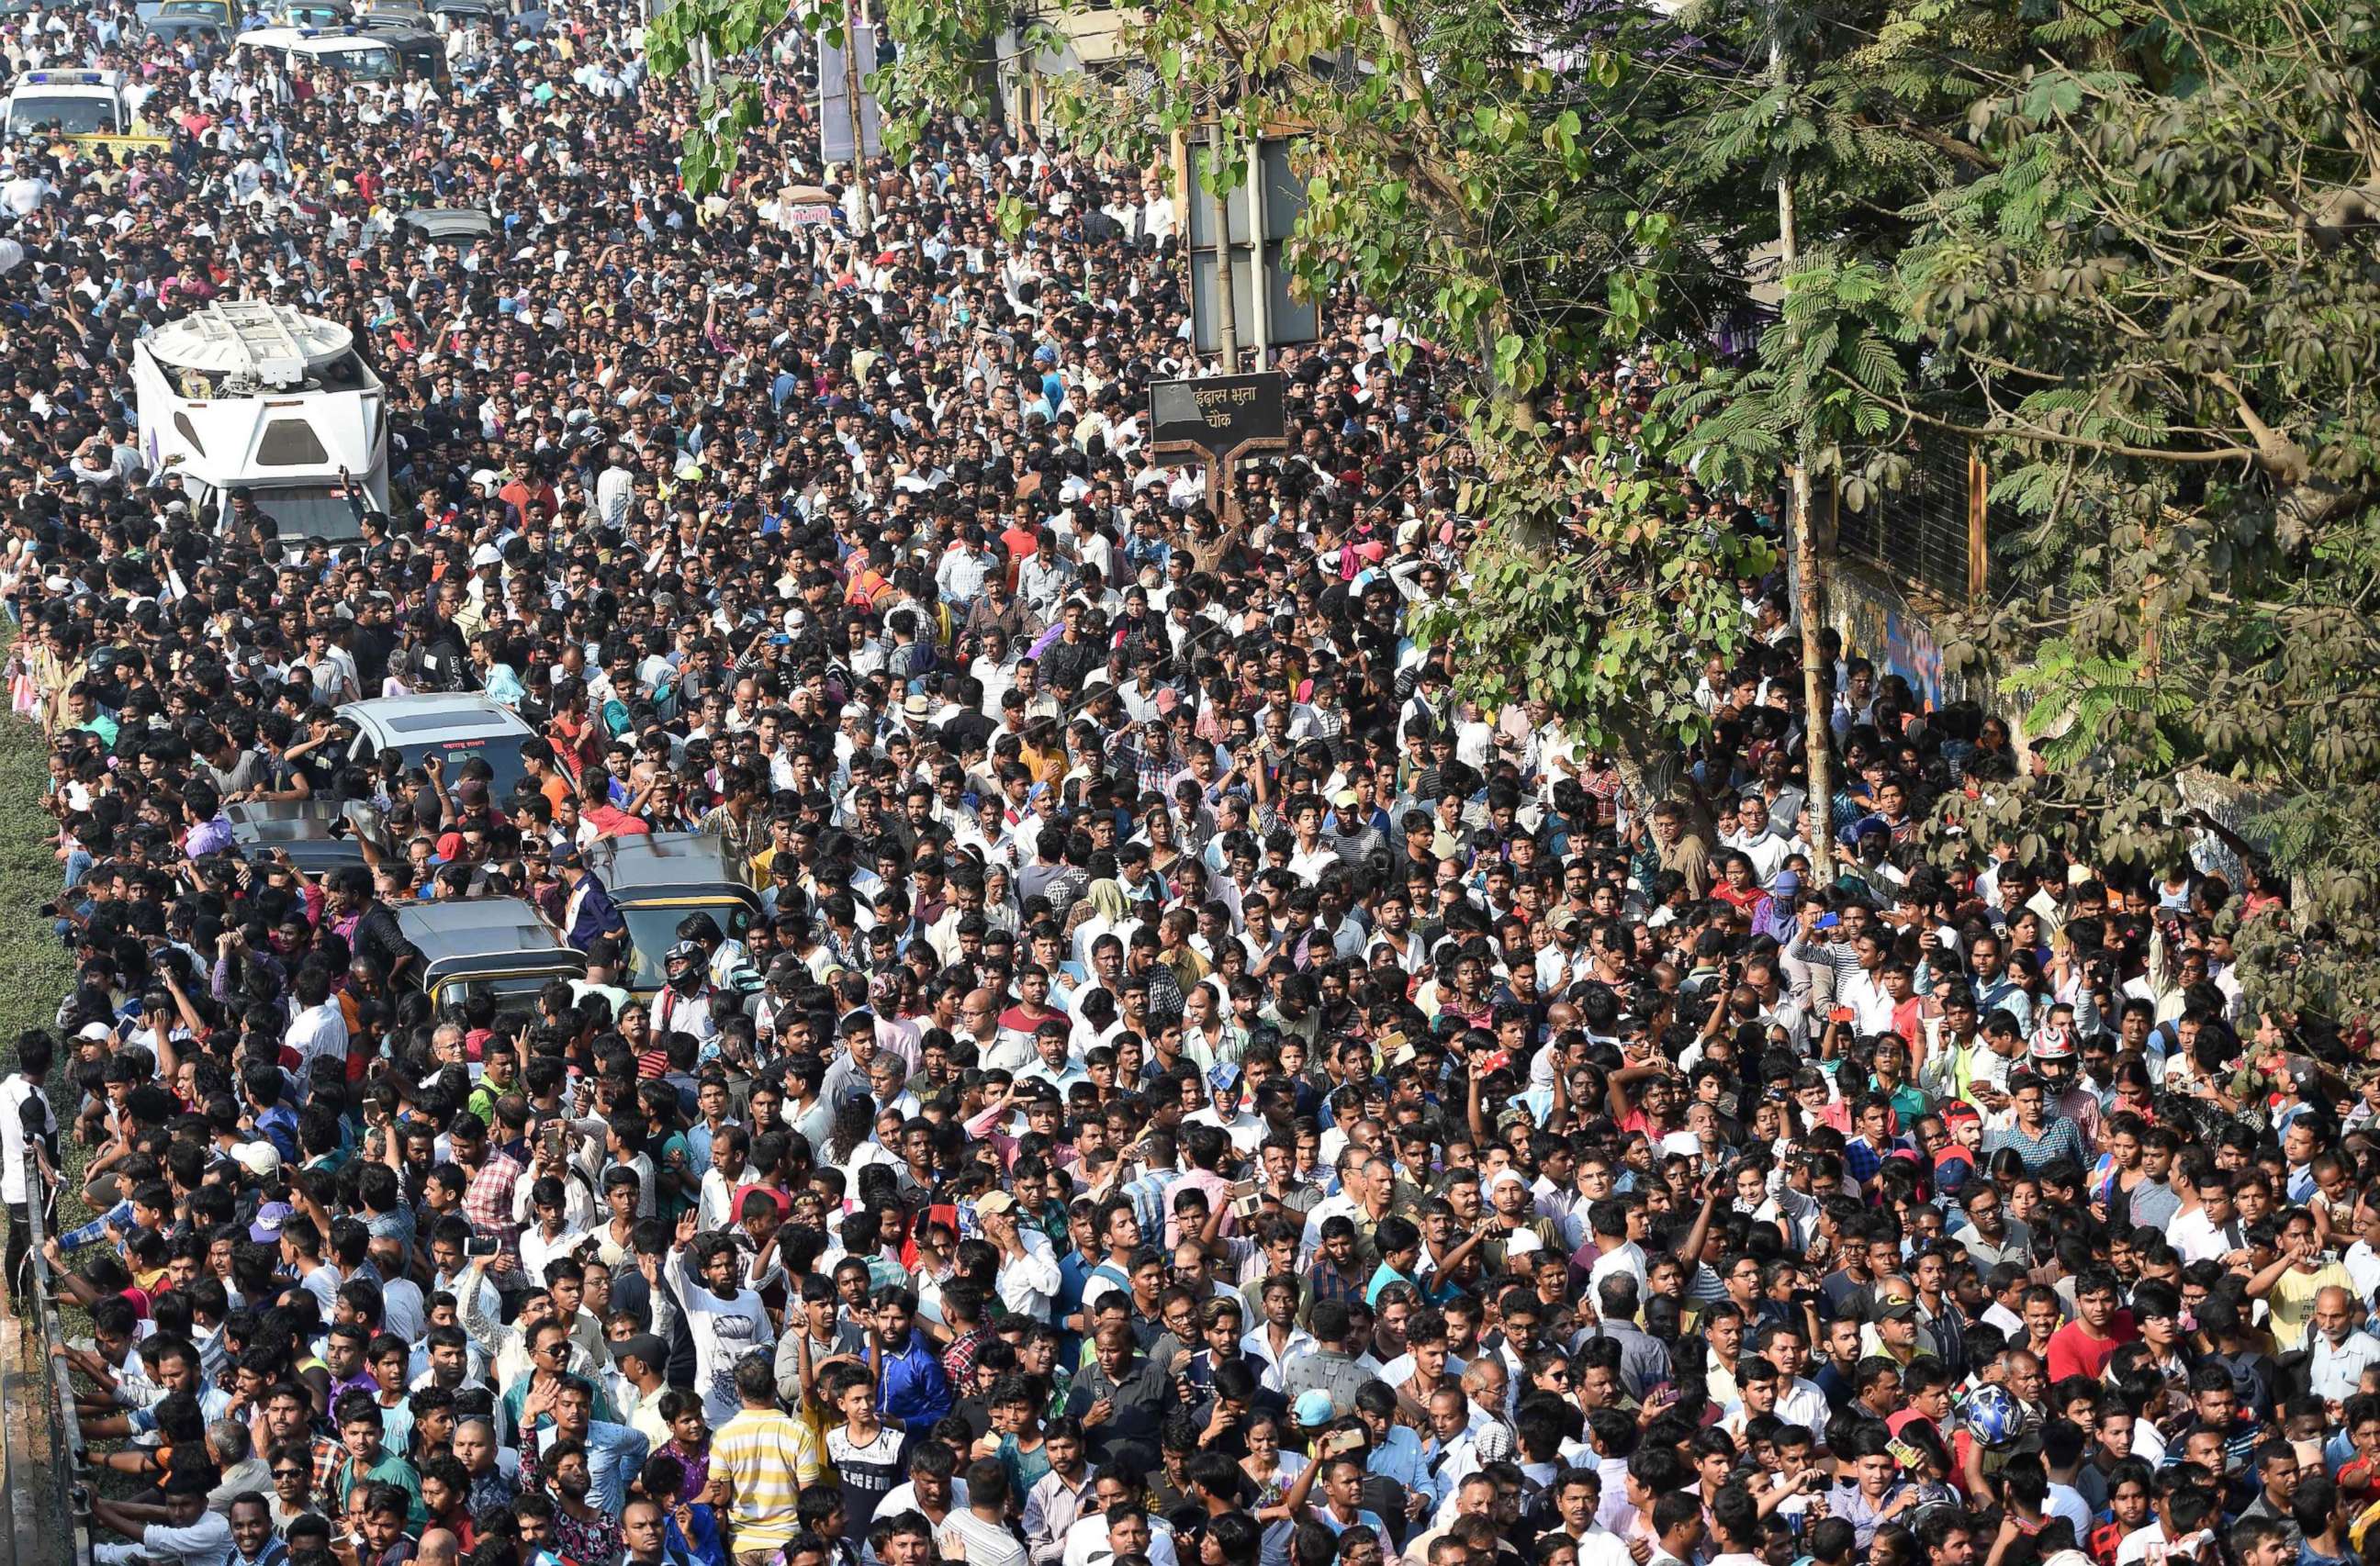 PHOTO: Crowds gather behind the funeral procession of Indian Bollywood actress Sridevi Kapoor in Mumbai, India, Feb 28, 2018.